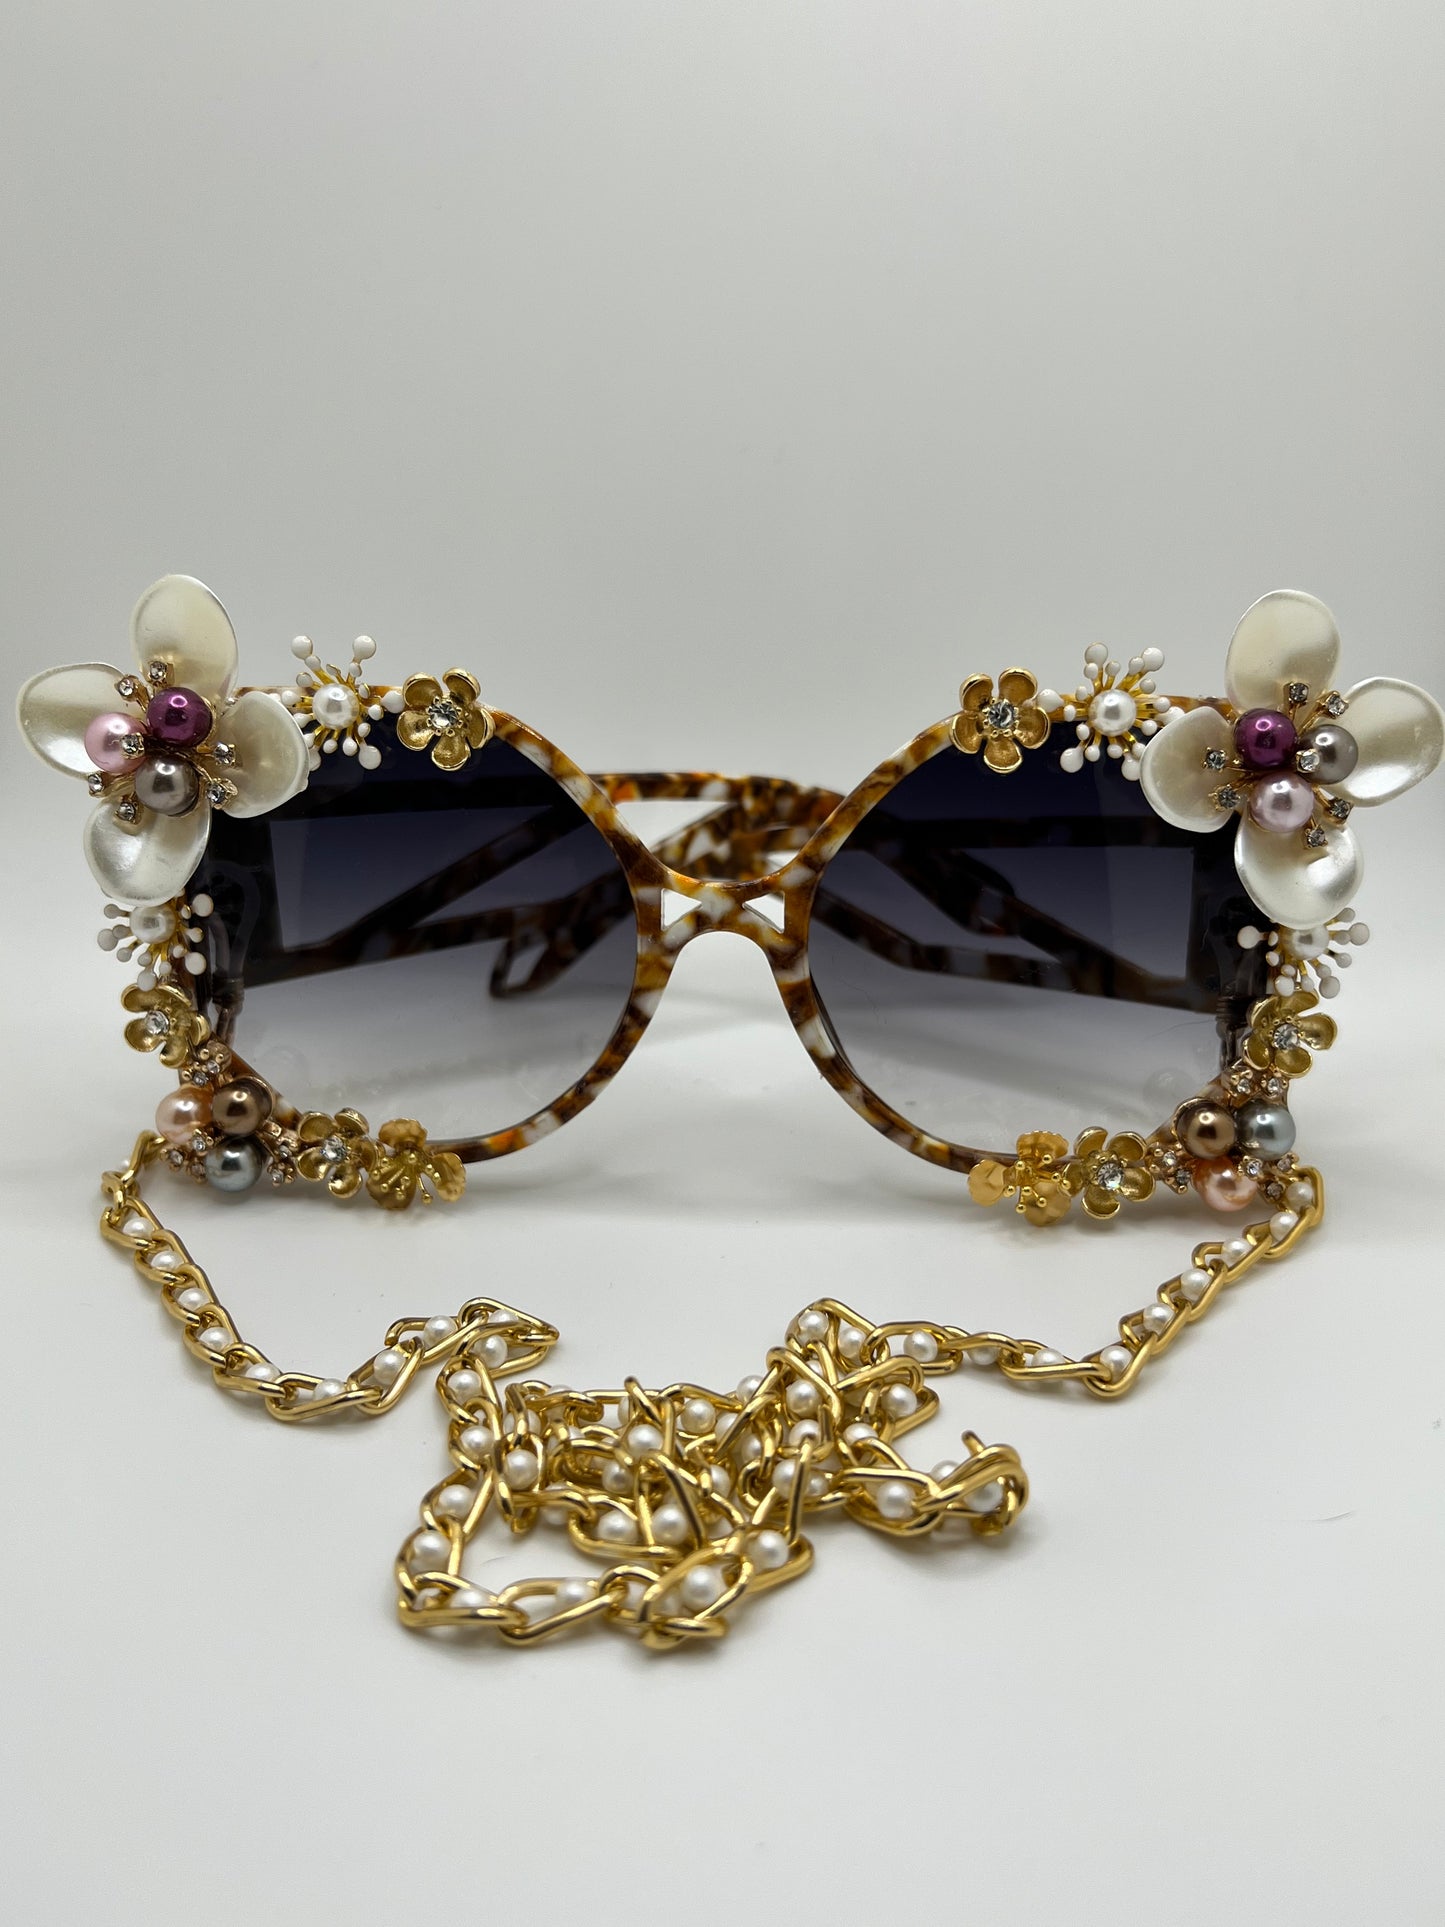 These square-sided, oversized sunglasses are covered in pearl flowers In white, pink, and deep maroon and are accompanied by an adjustable and removable eyewear chain.